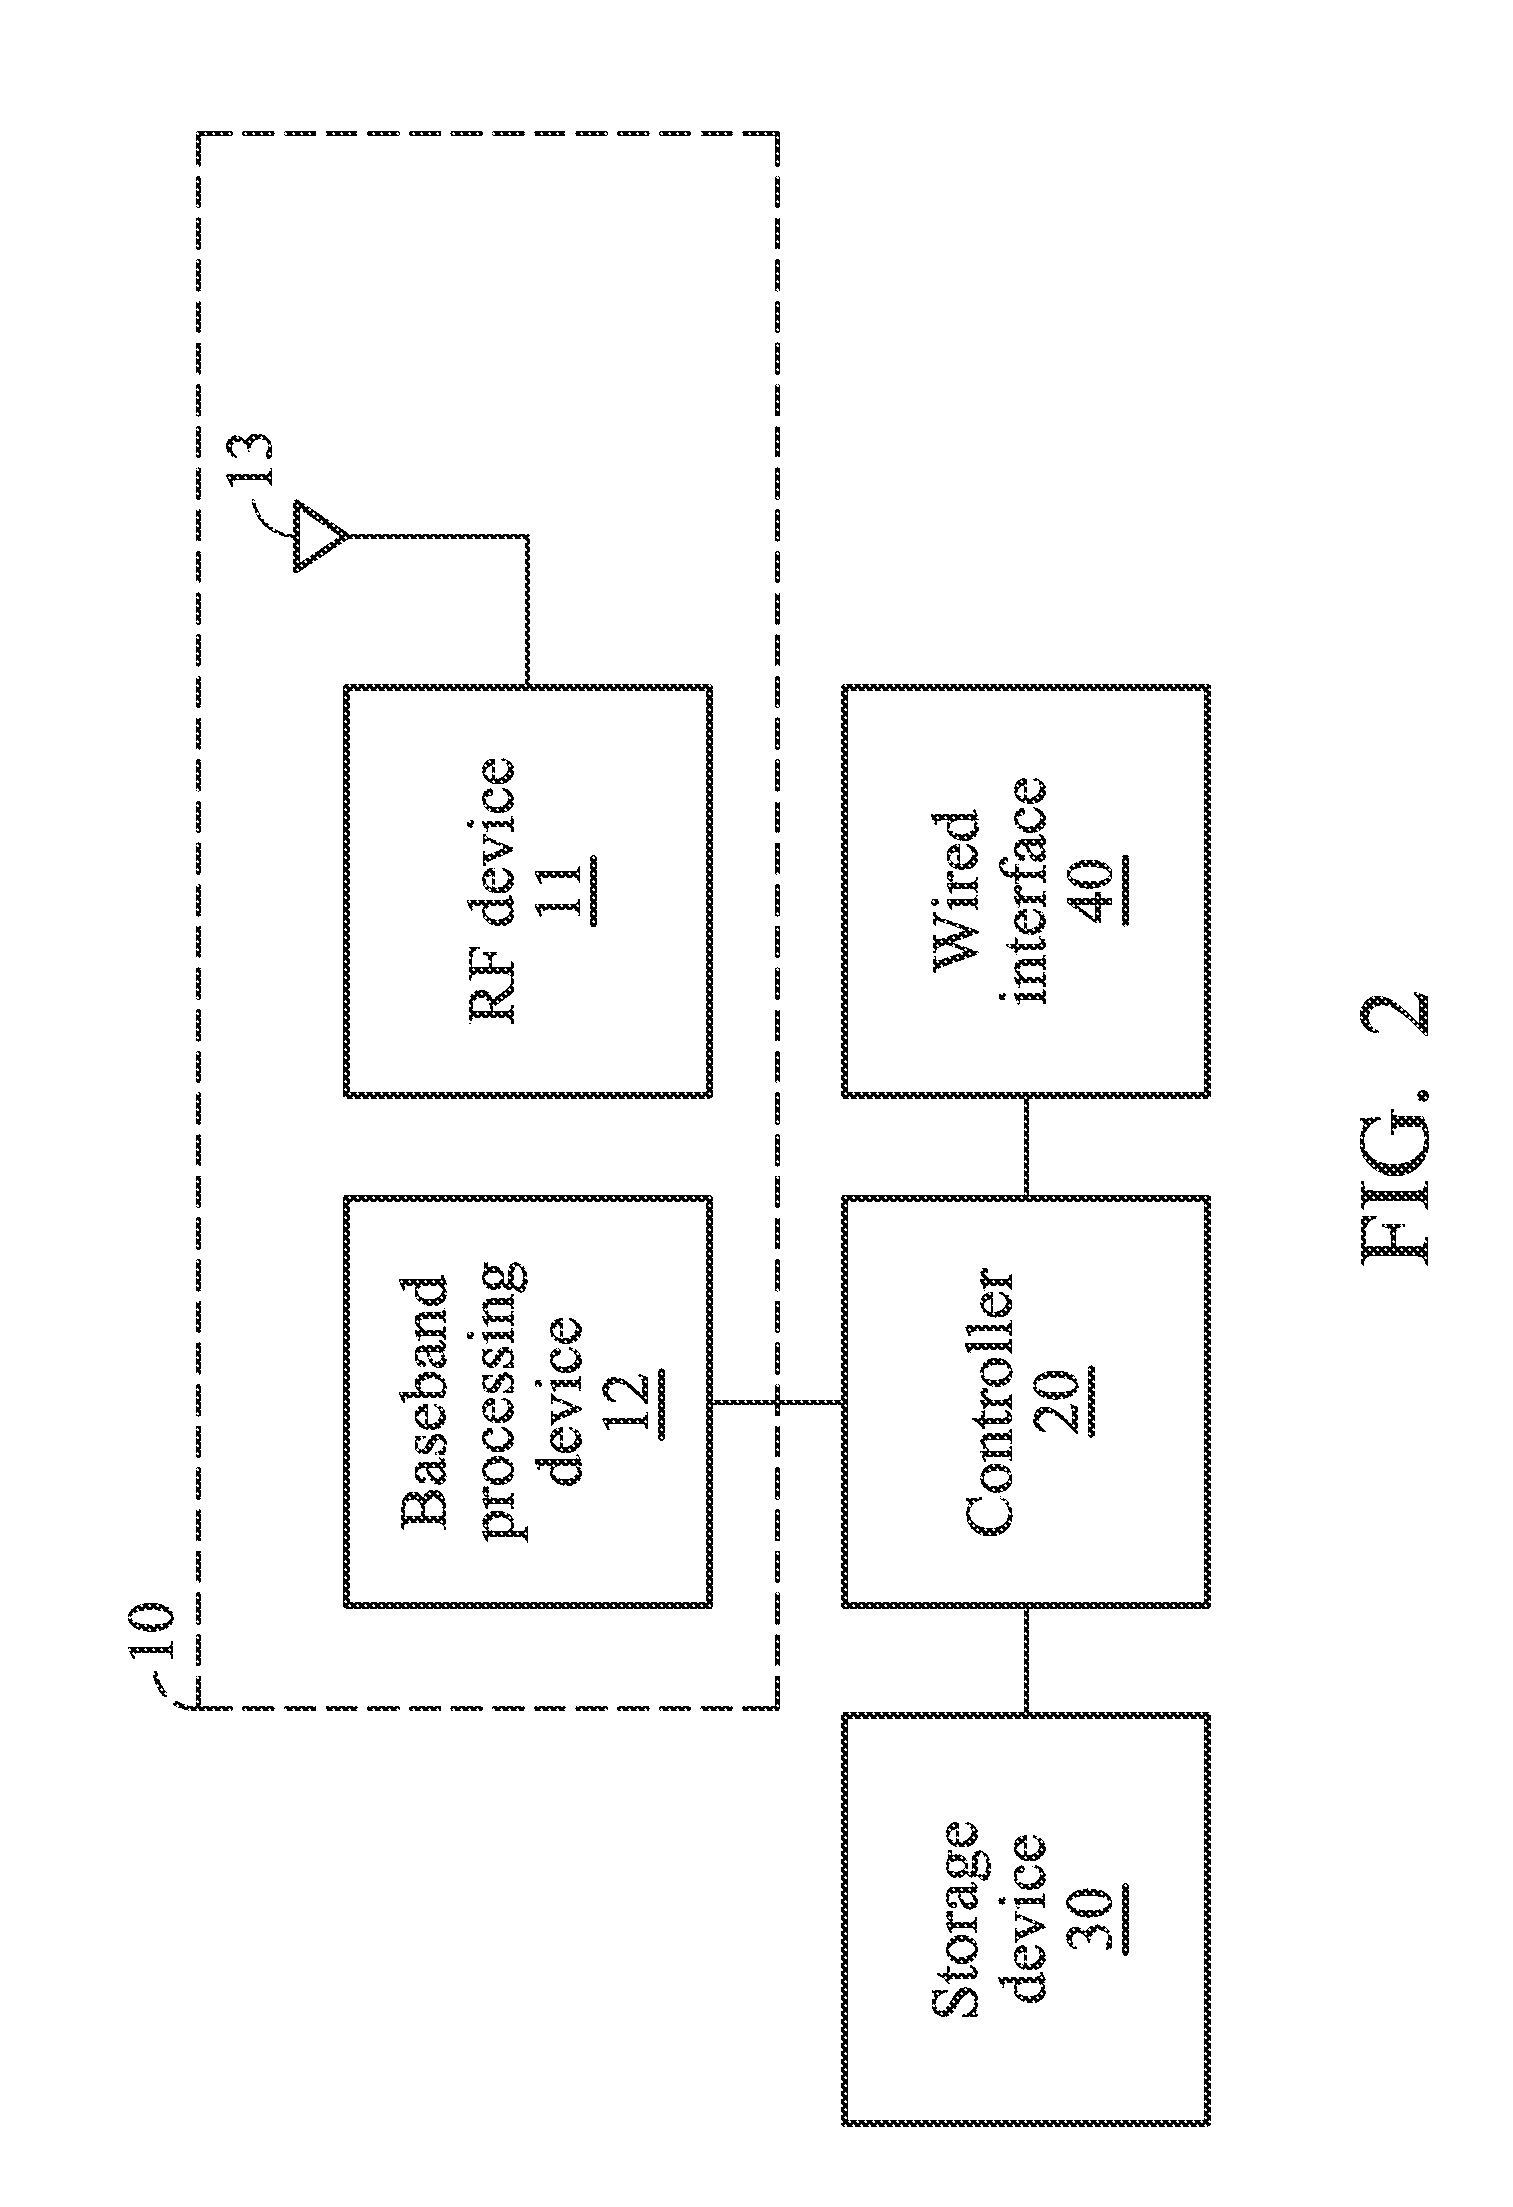 Cellular stations and methods for warning status reporting